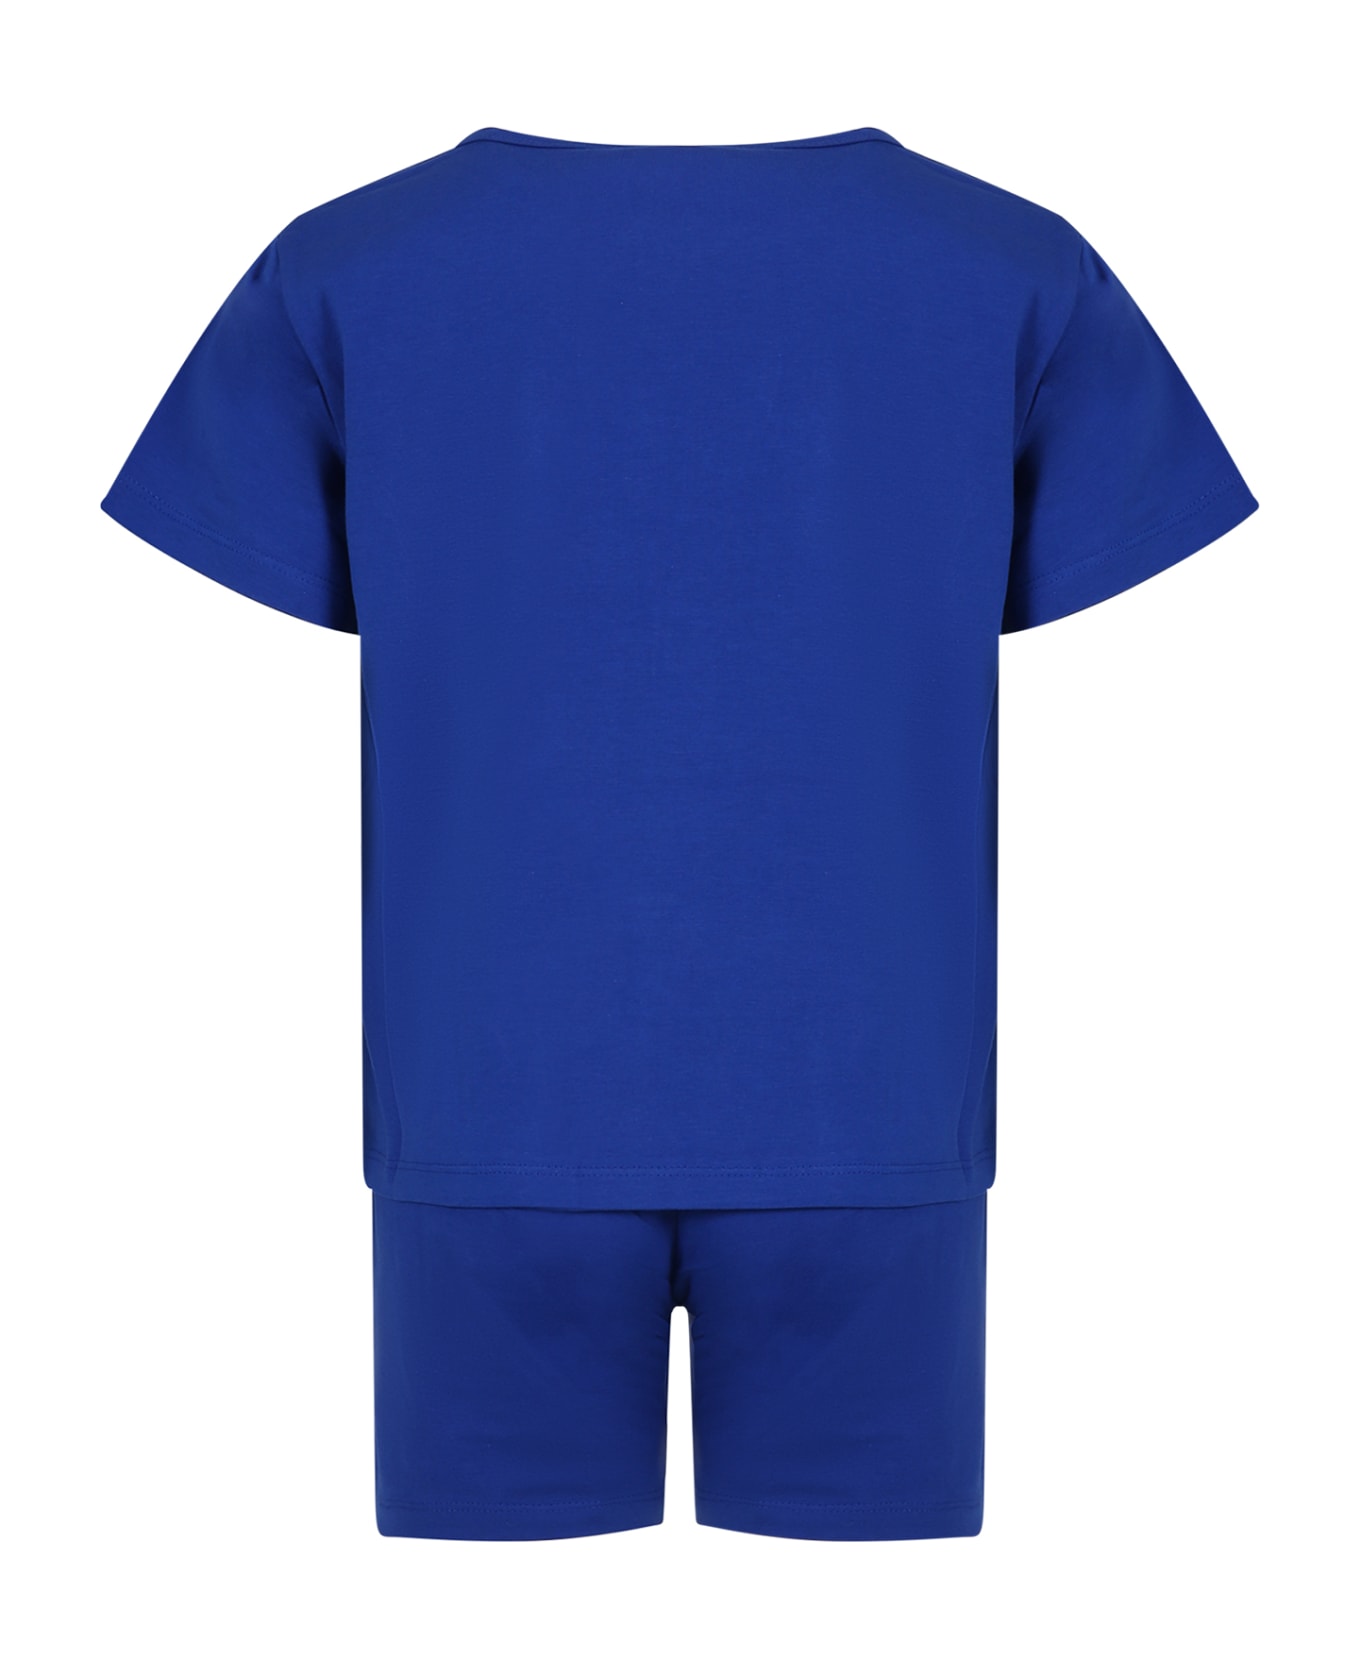 Molo Blue Pajamas For Kids With Smiley - Blue